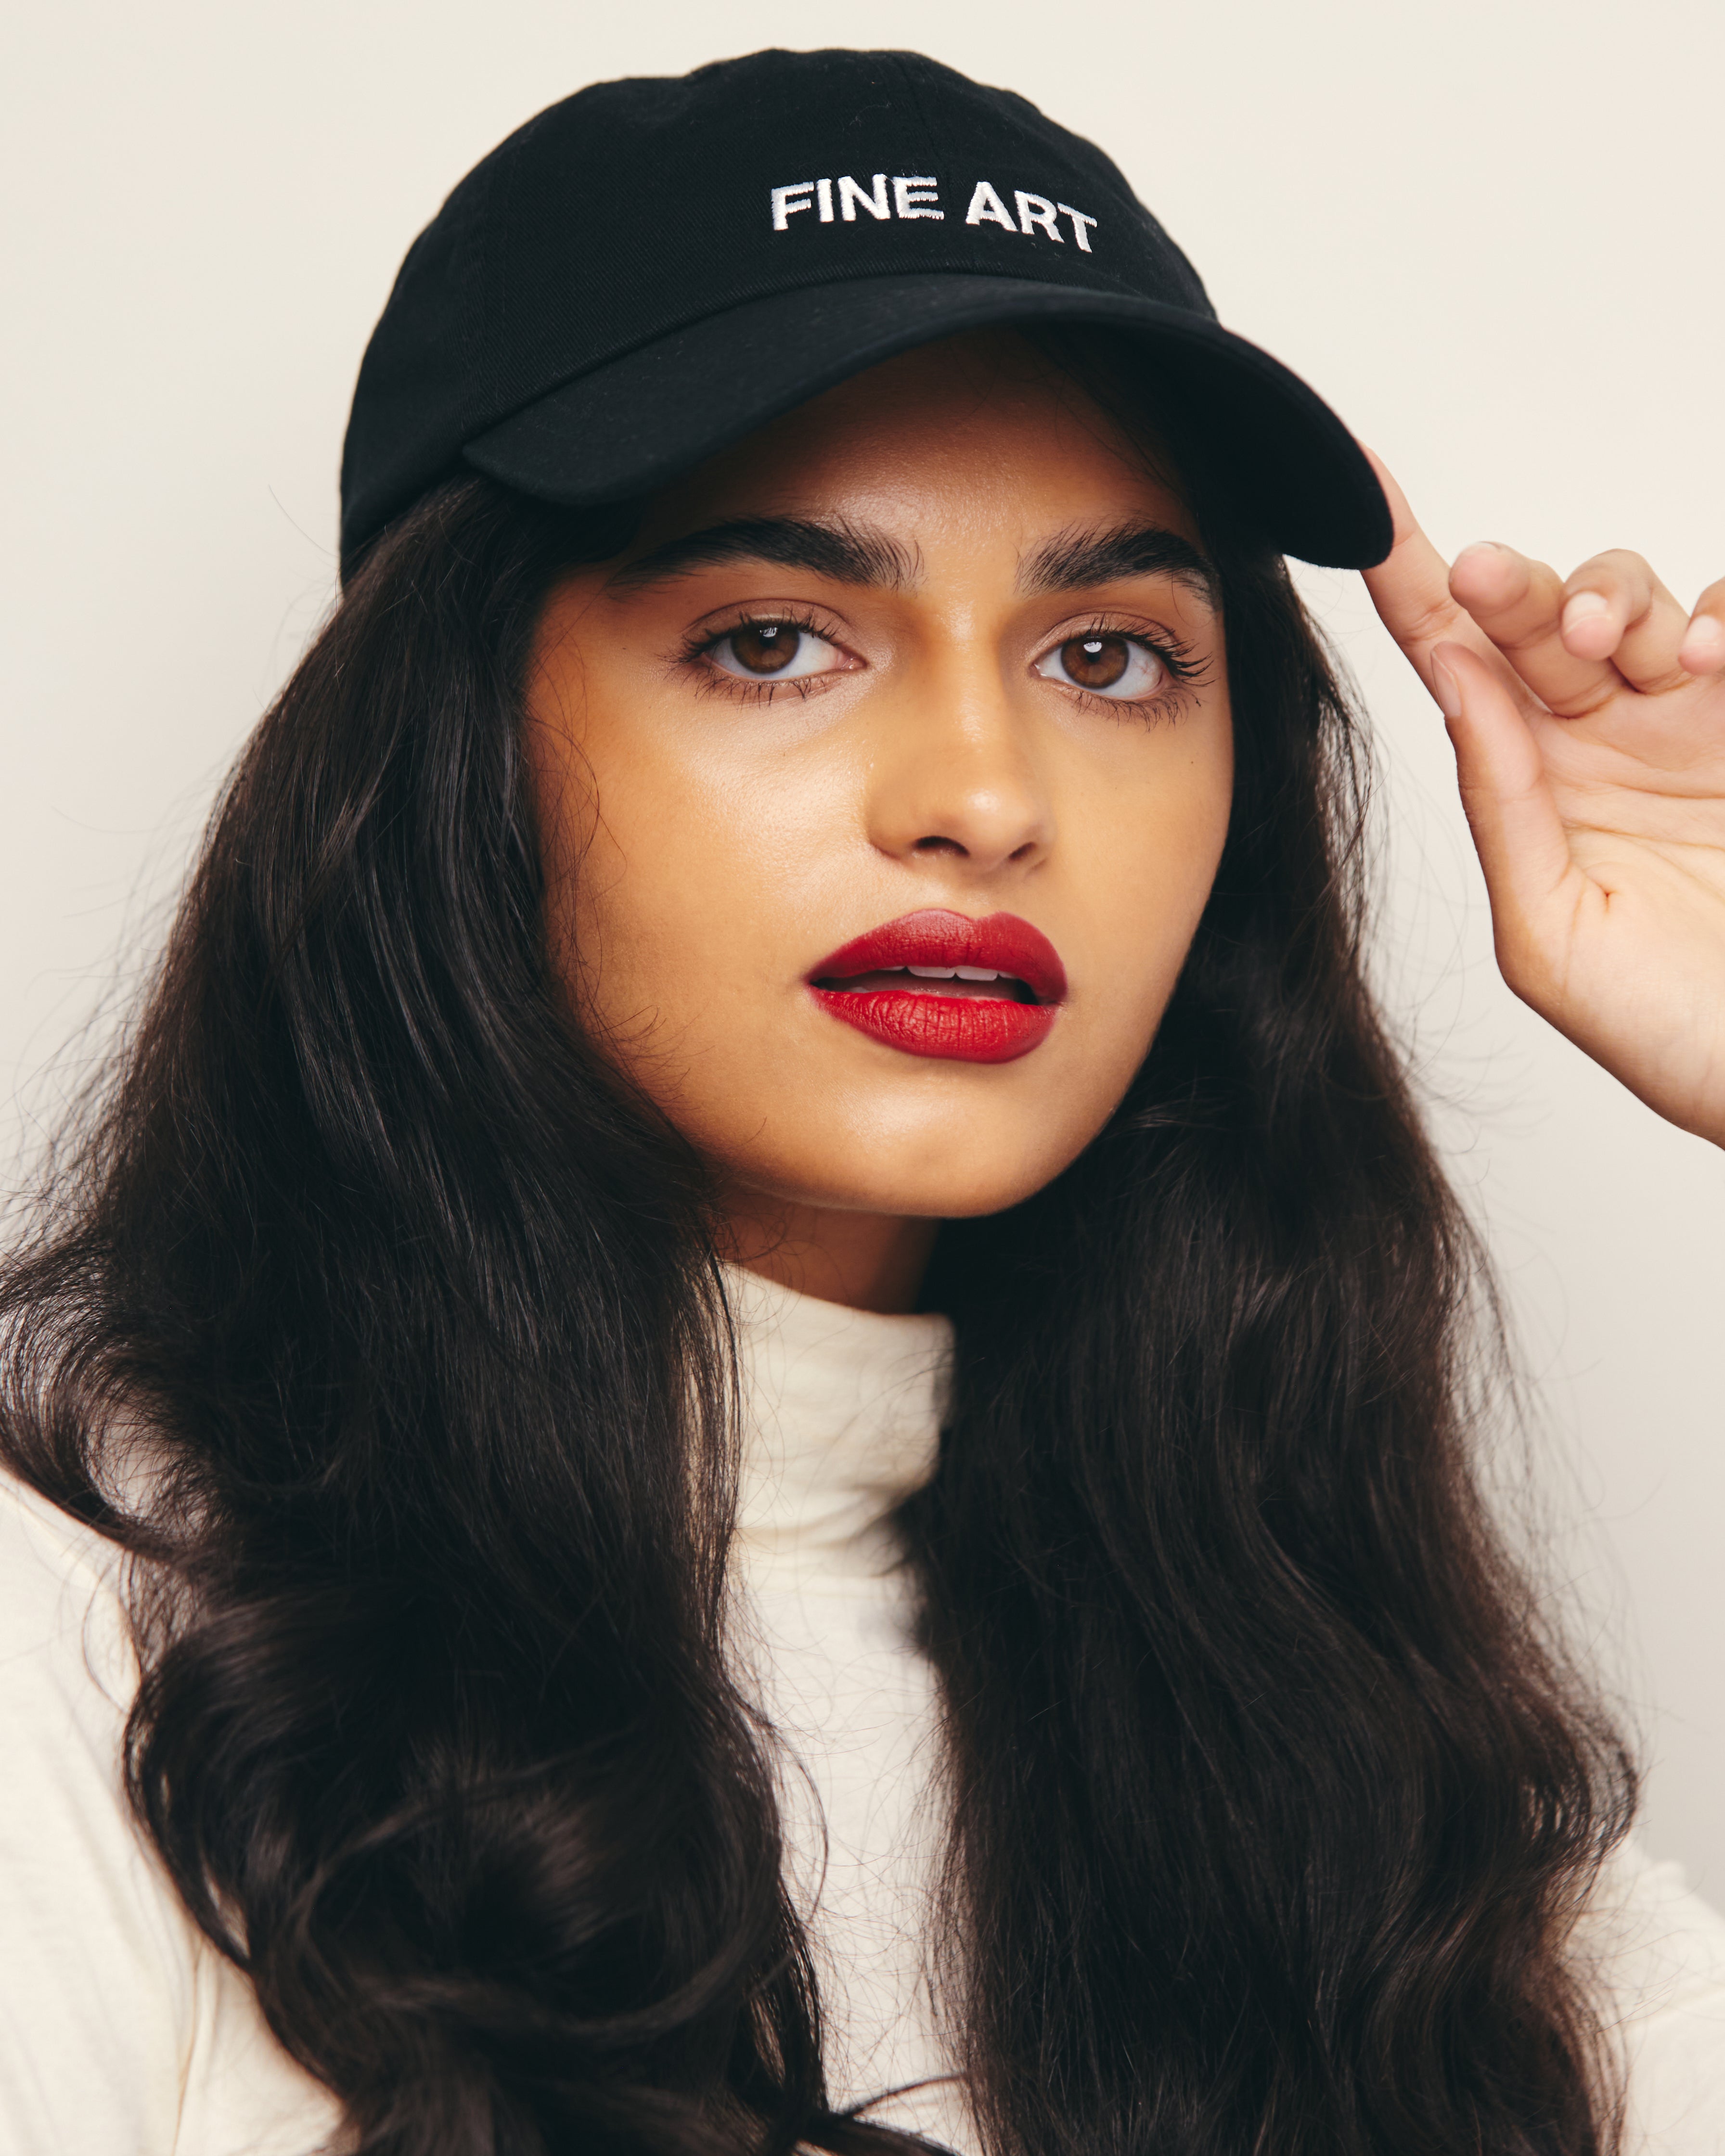 Mira Bhat wears Black Baseball Cap / Dad Hat with Fine Art Movement Text Embroidery on Front. 100% Cotton.